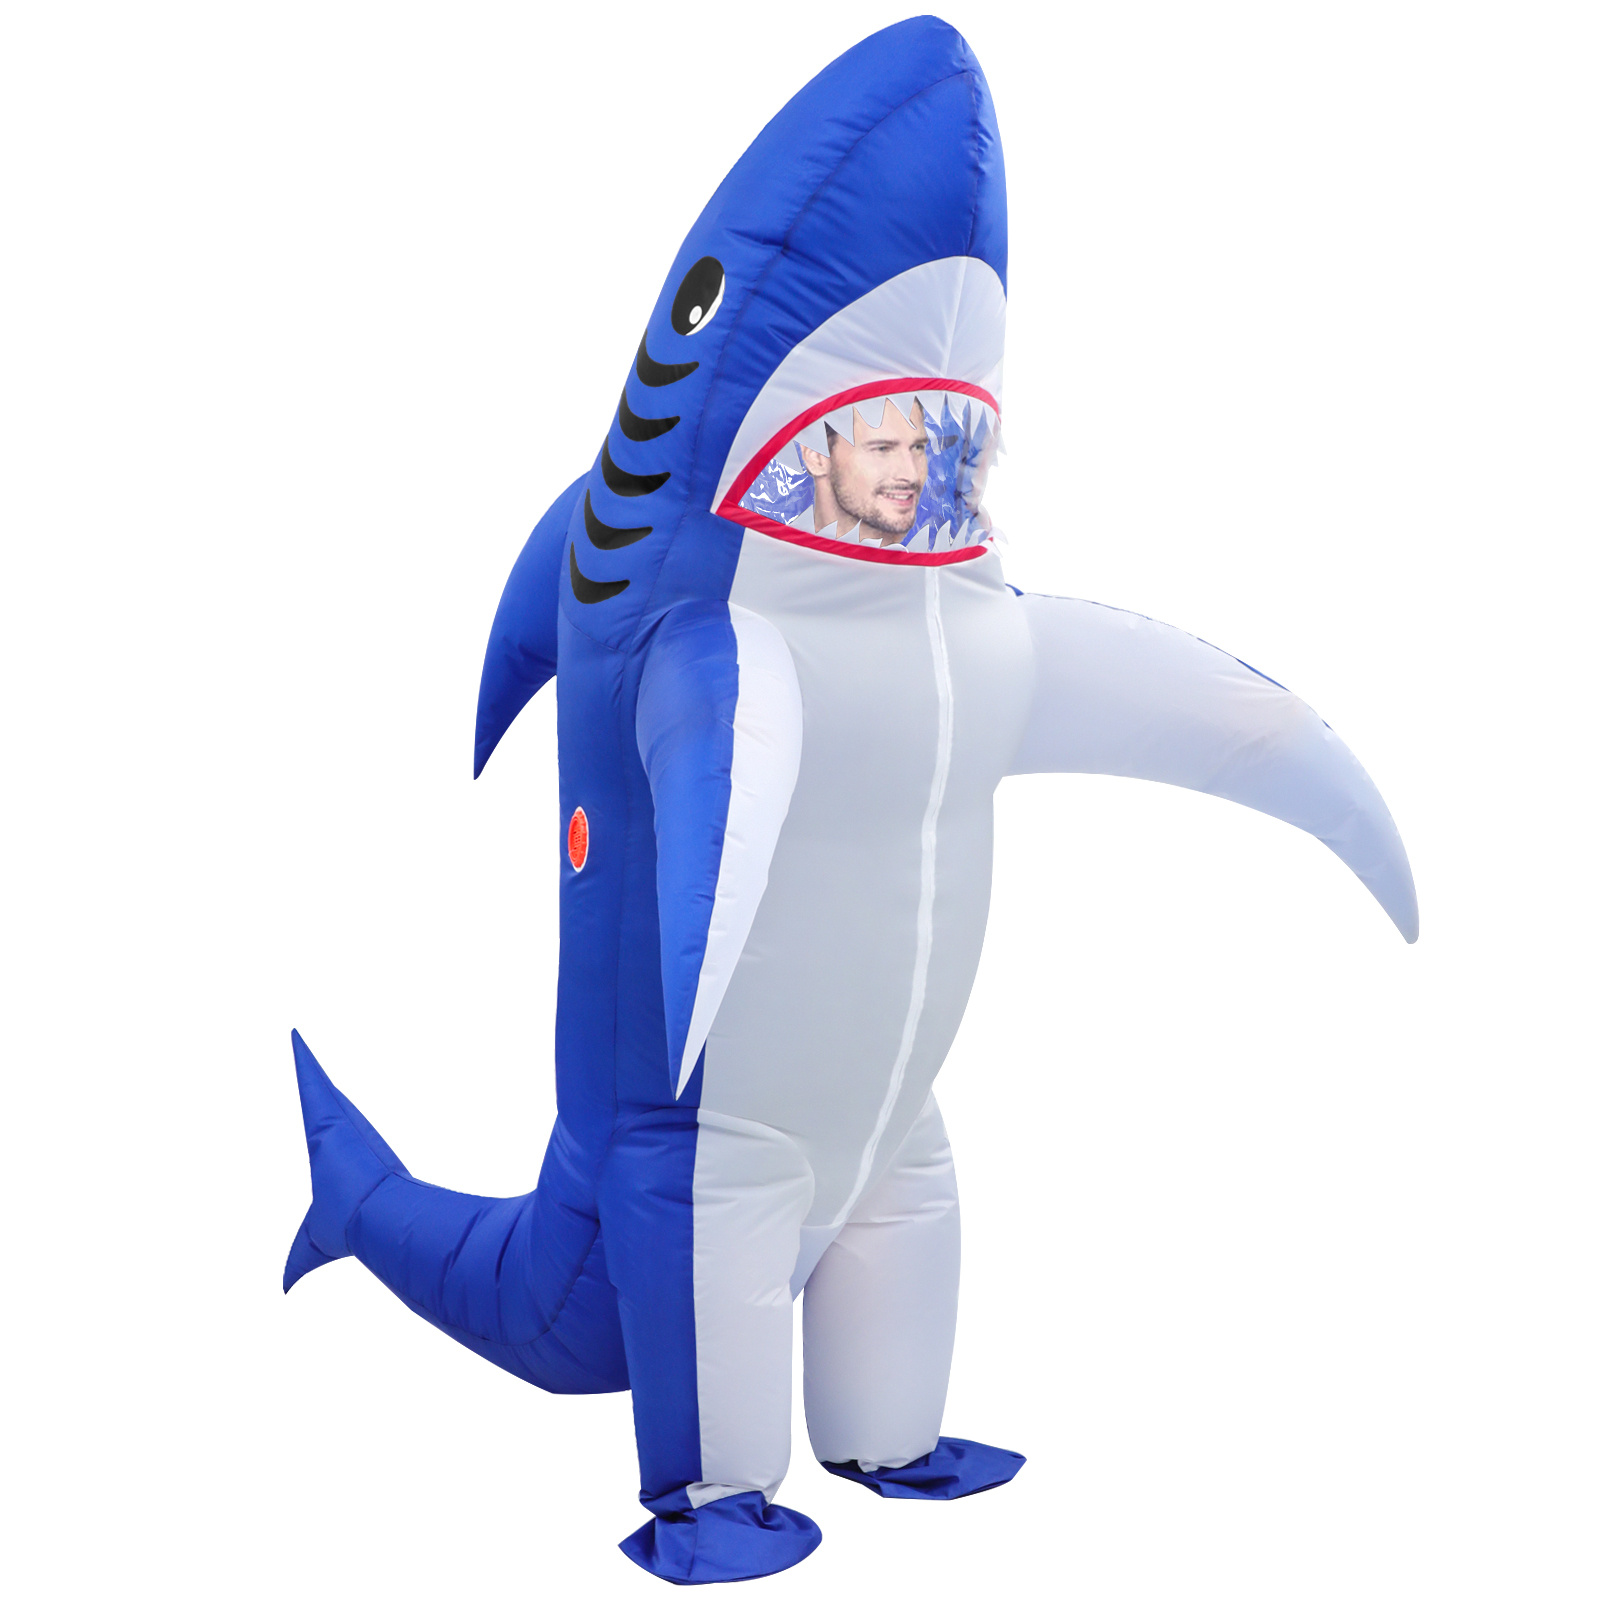 Mutant Shark Inflatable Costume for Adult and Teens Funny Halloween Costumes Cosplay Clothes Fantasy Costume Suit for Height, Christmas Gifts, 150